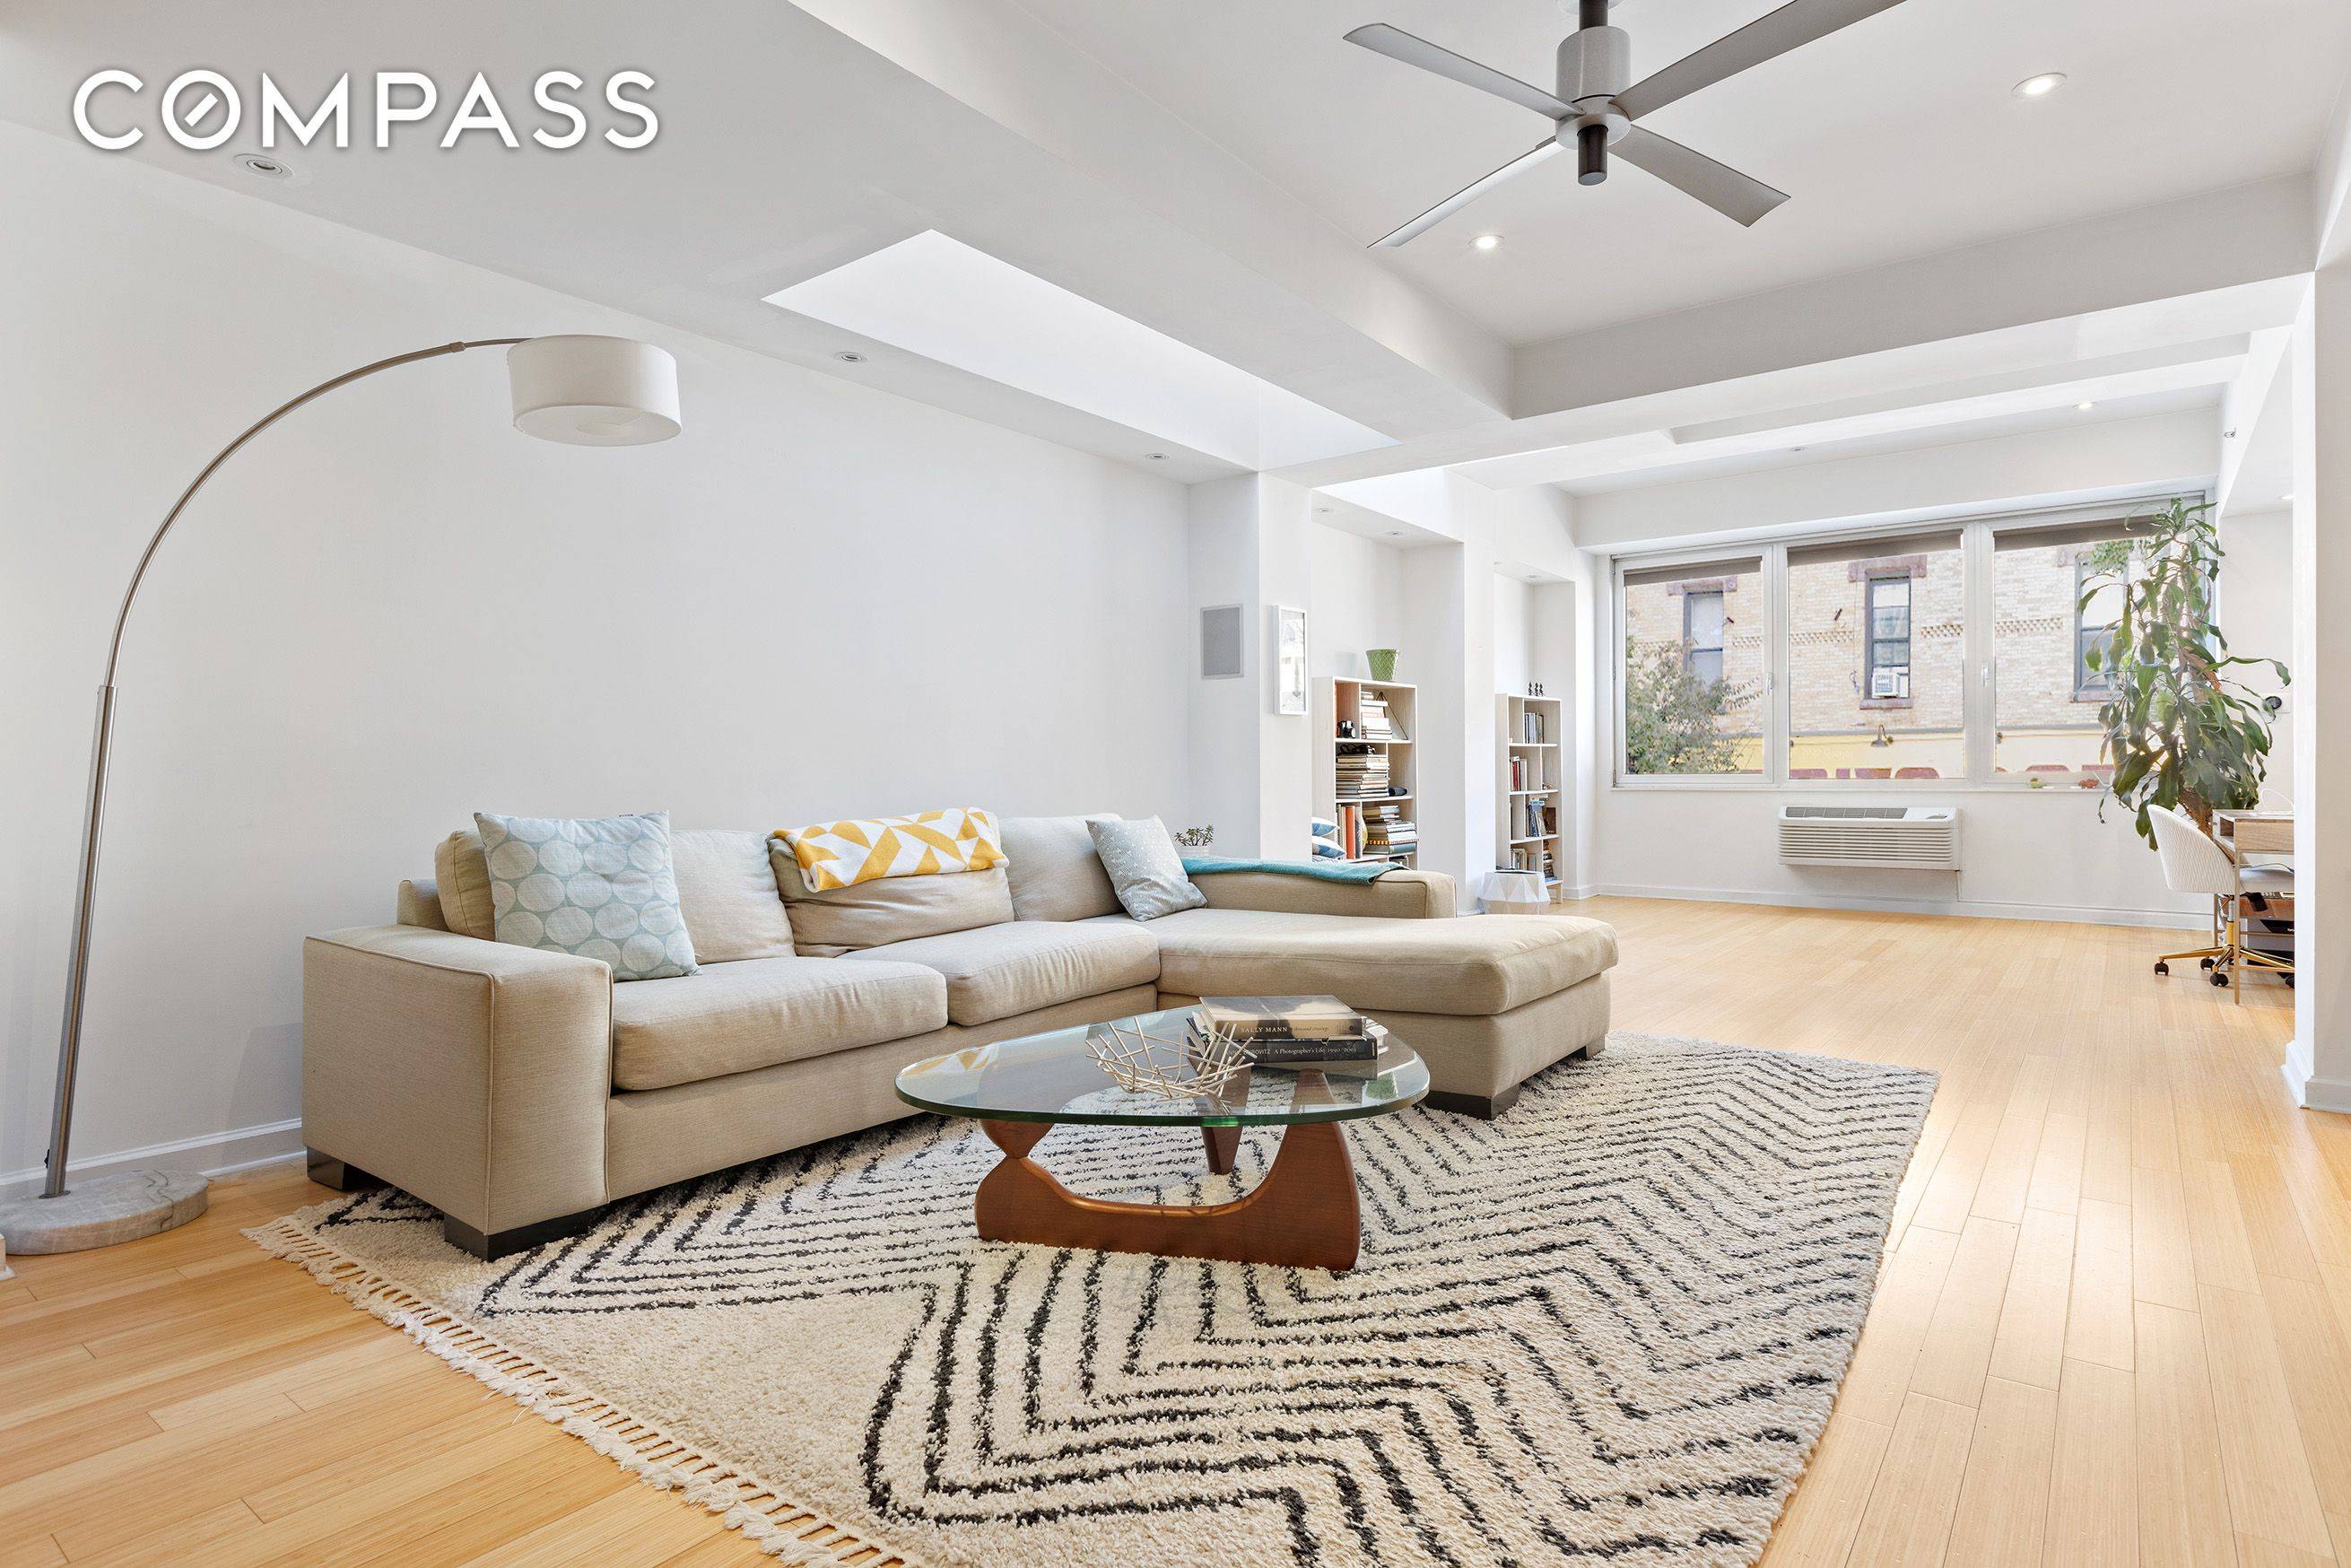 Idyllic Park Slope living is calling at the luxury boutique Park Place Condominium, located on a lovely tree lined, landmarked brownstone block.